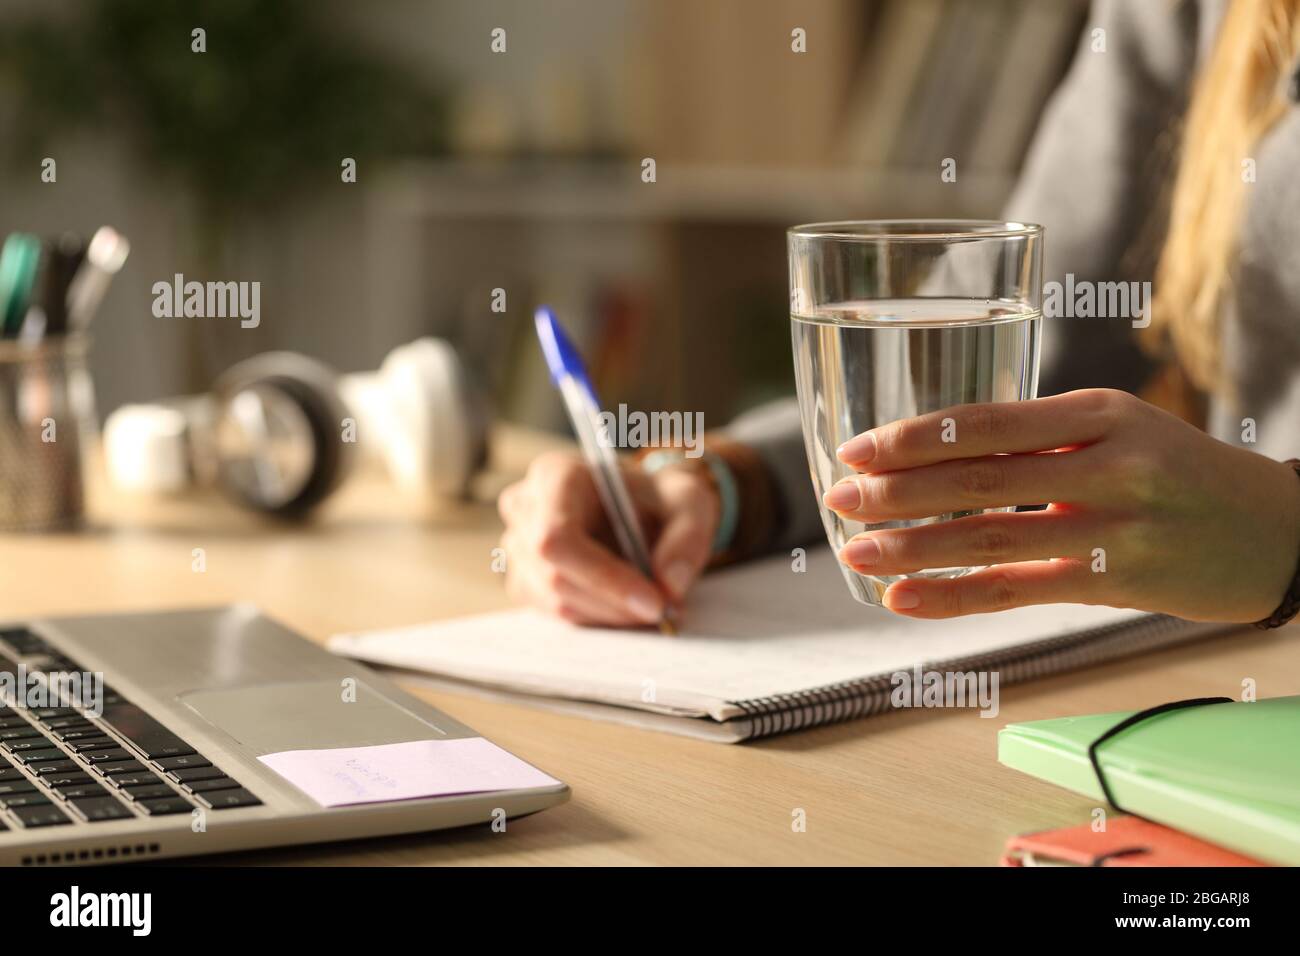 Close up of student girl hands holding glass of water at night studying siting on a desk Stock Photo